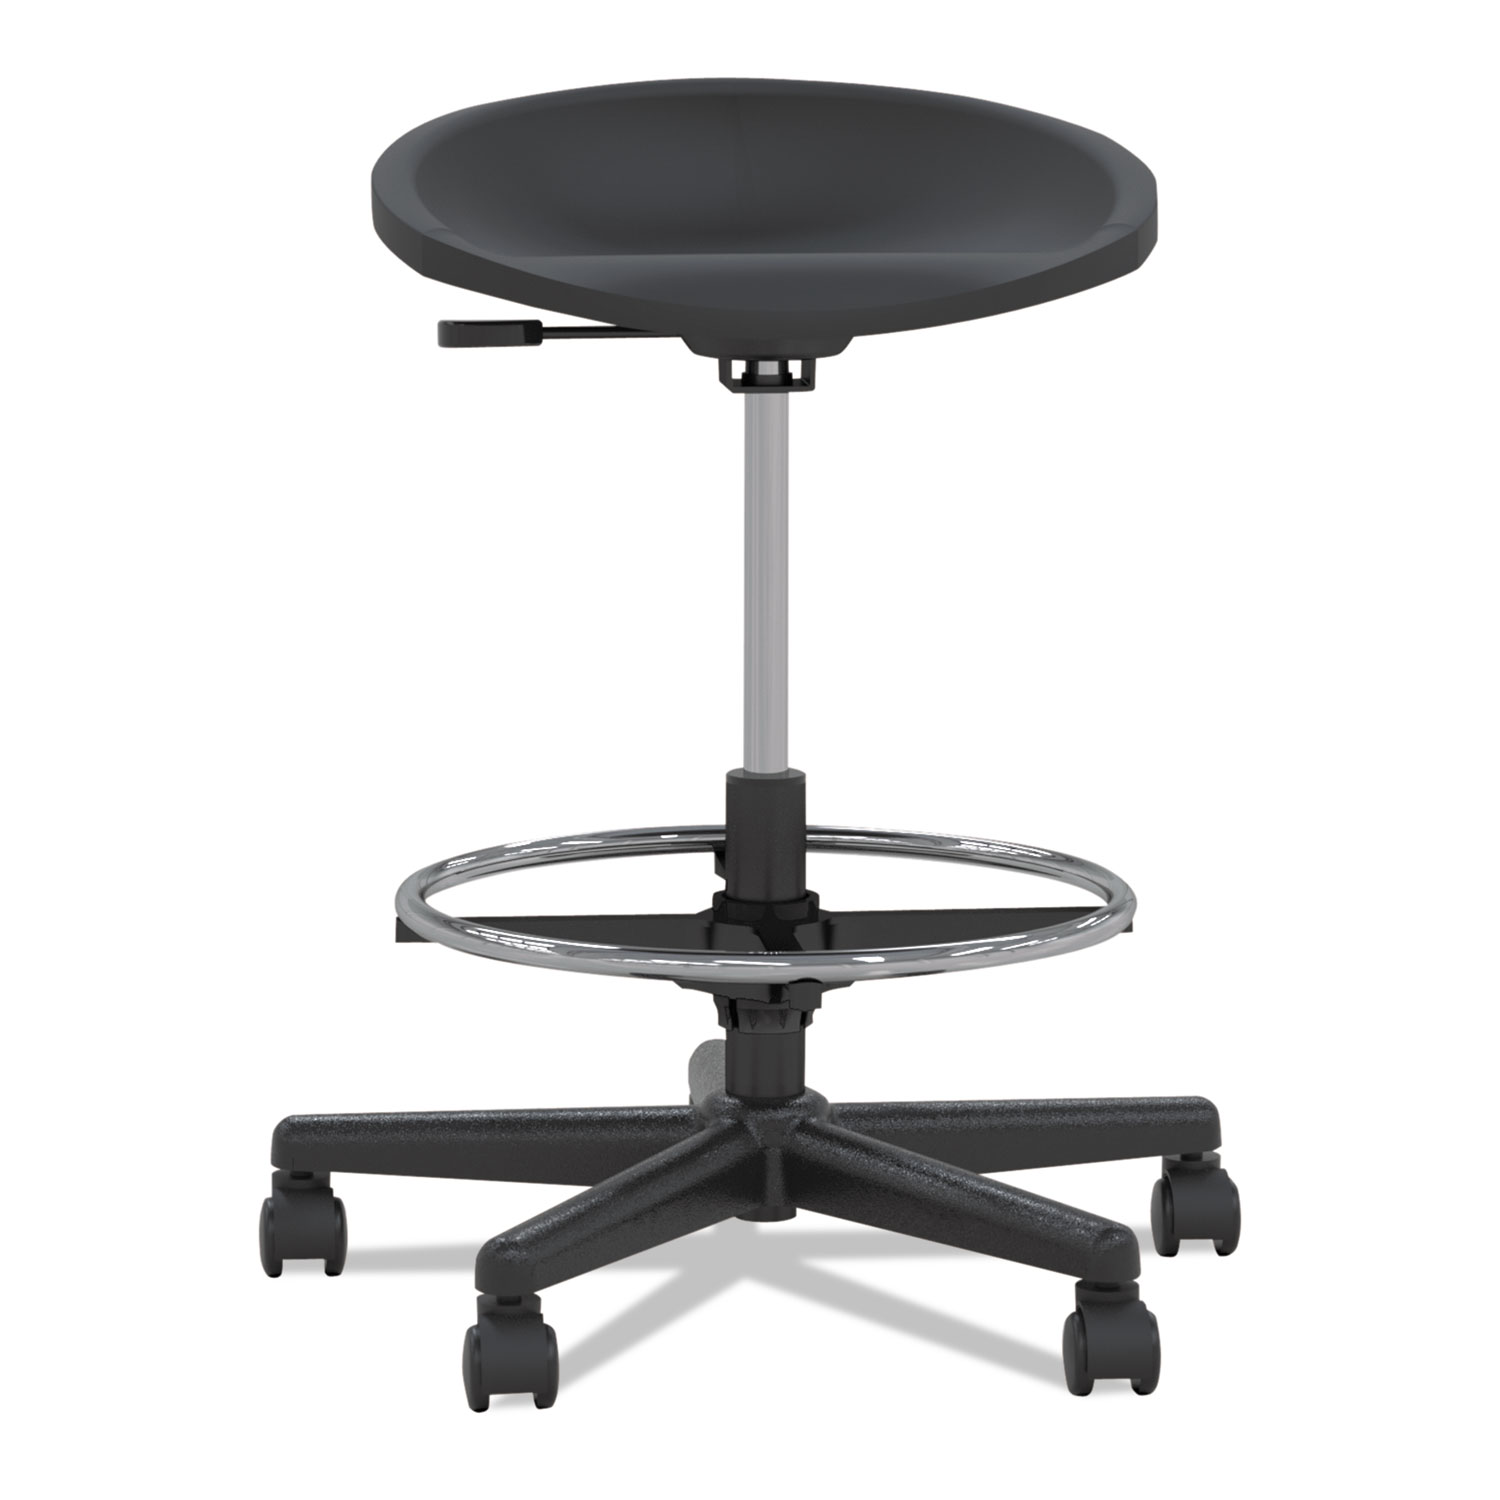  Safco 6005AGB Tech Stool, 31.25 Seat Height, Supports up to 250 lbs., Black Seat/Black Back, Black Base (MLN6005AGB) 